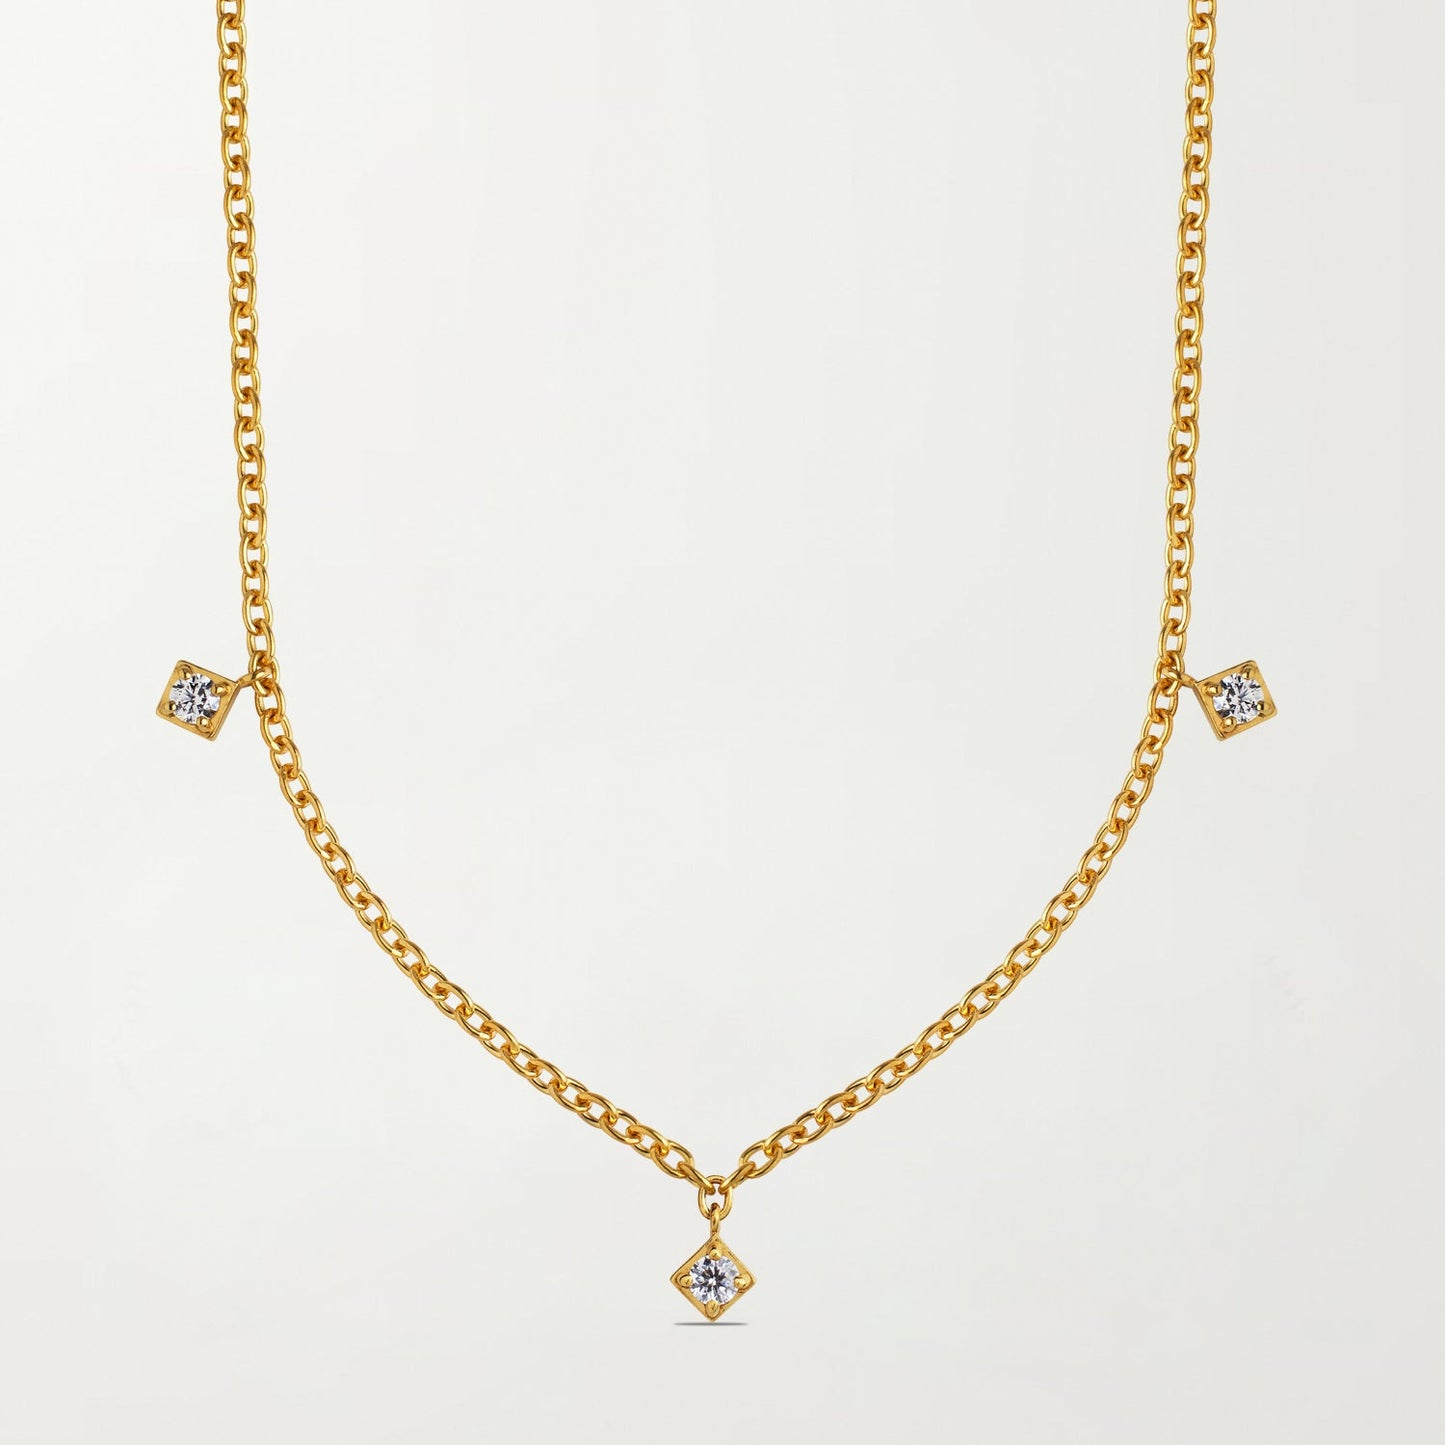 The Gstaad Choker